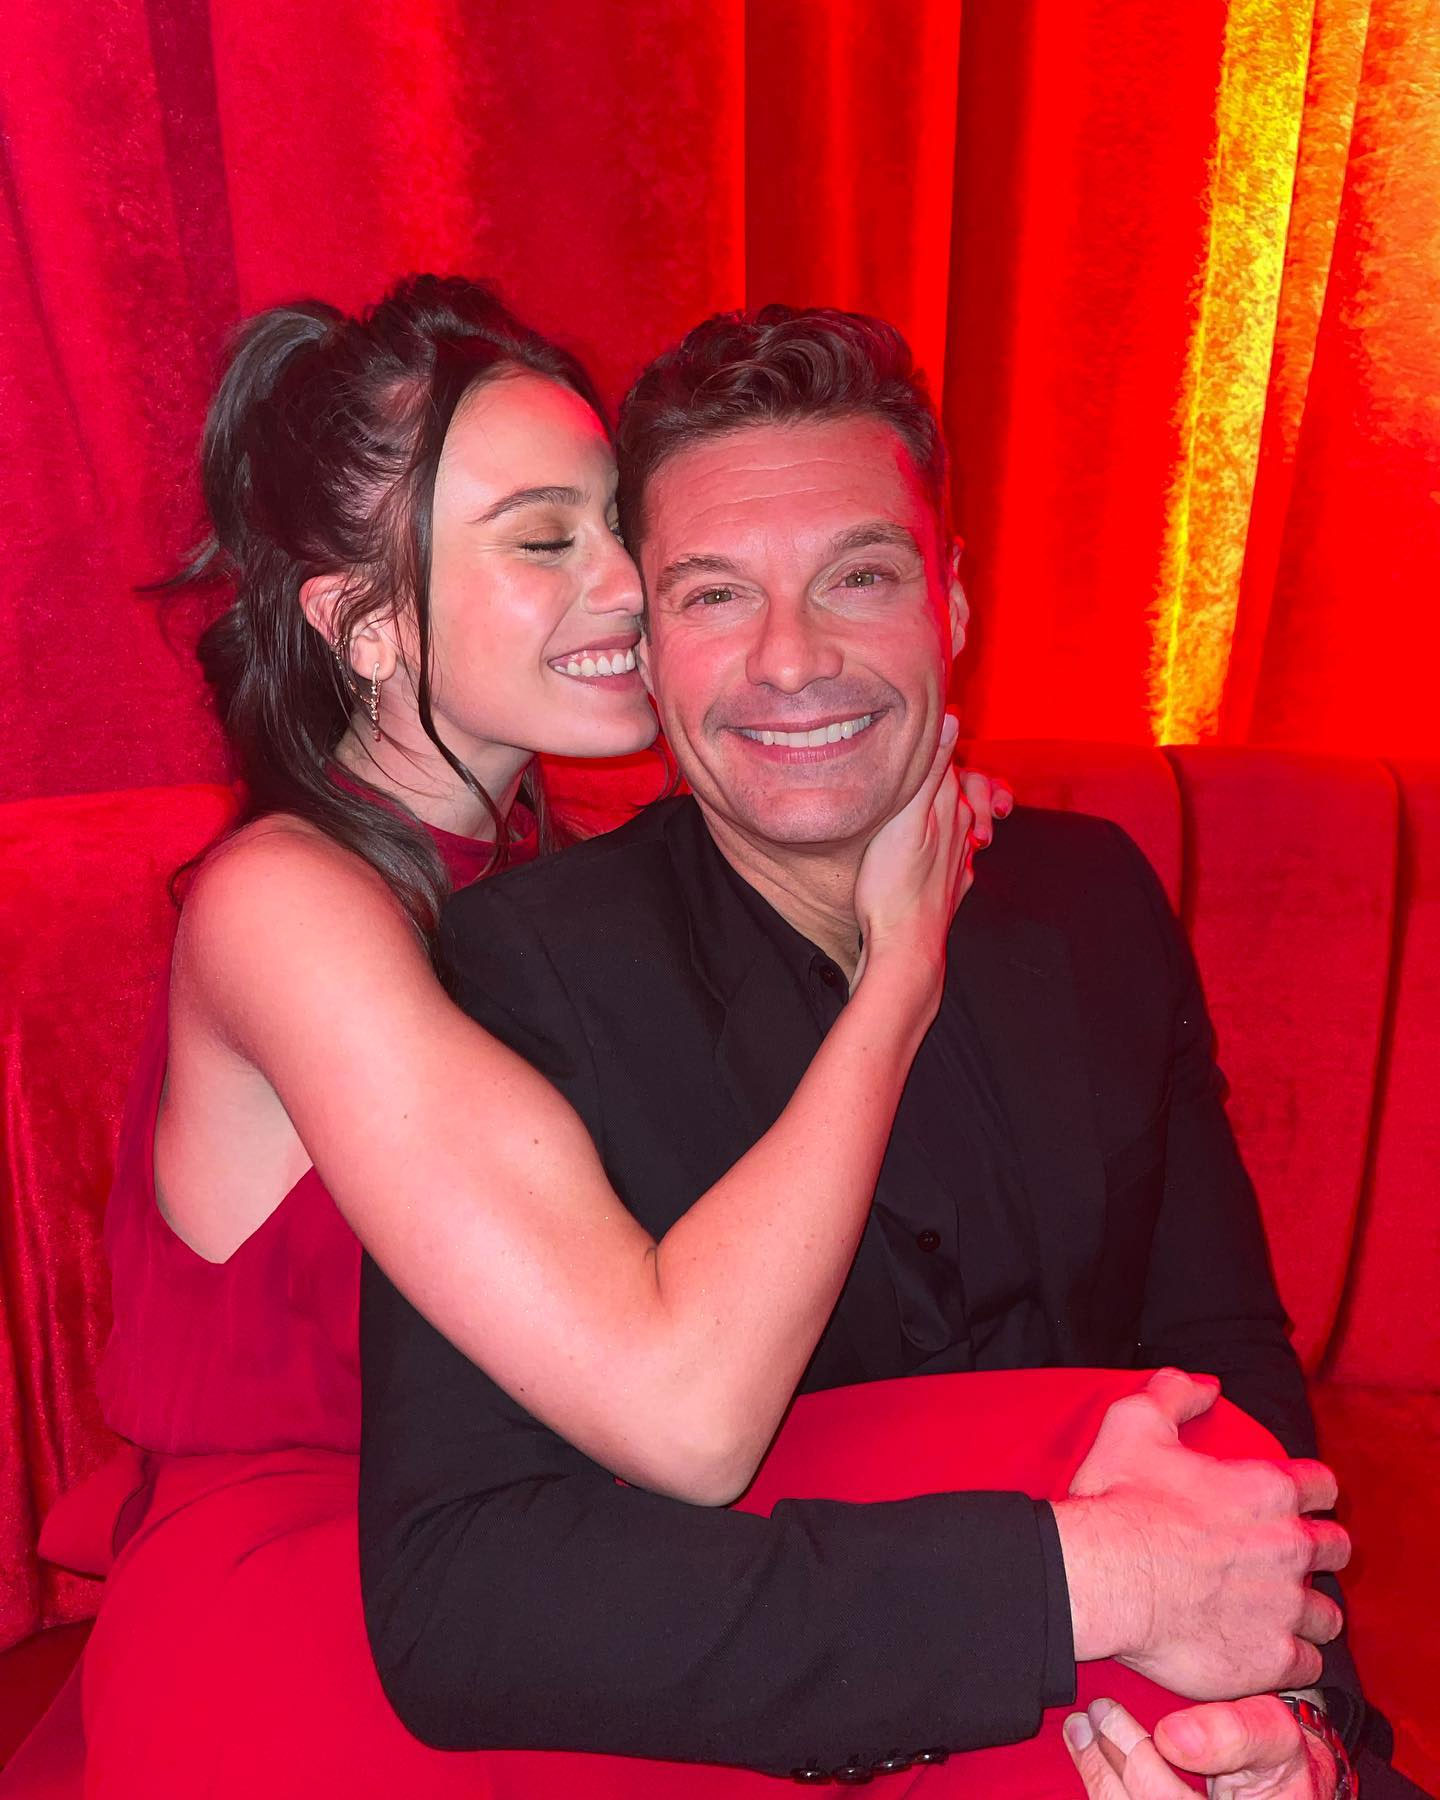 What is Aubrey Paige Petcosky's Age? Latest Update on Ryan Seacrest's New Girlfriend Personal Life, Career, Biography, Net Worth, and More in 2022